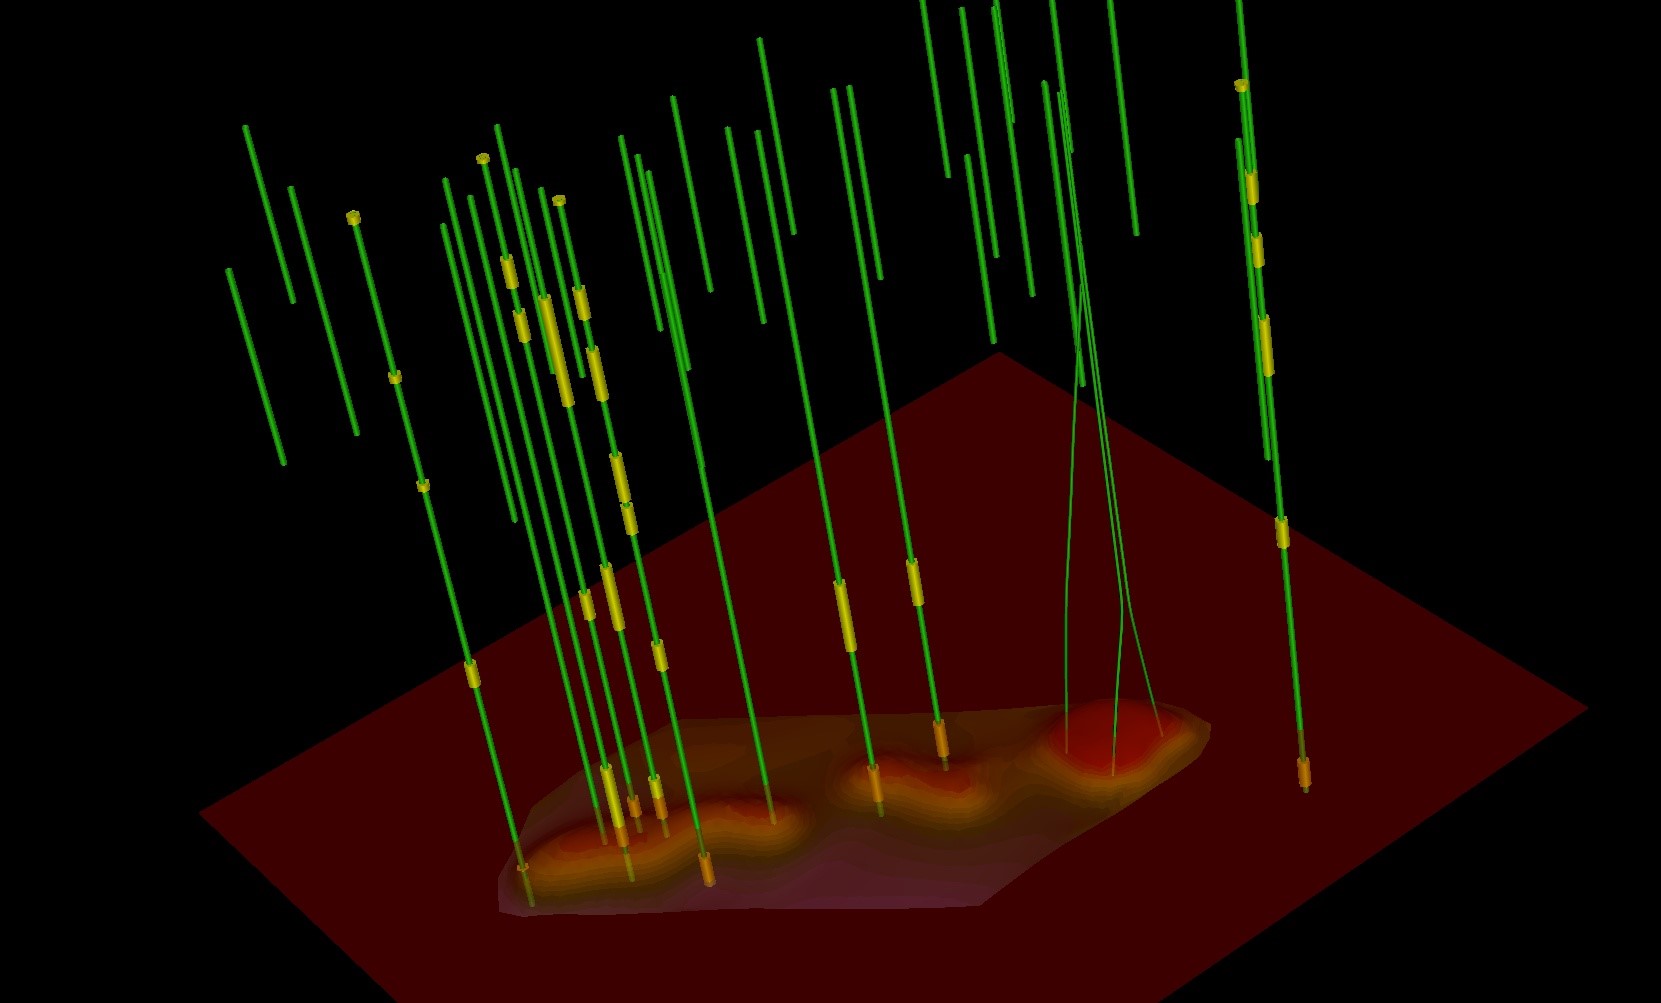 3D representation of wells near the reefs showing depths and plugging configurations.